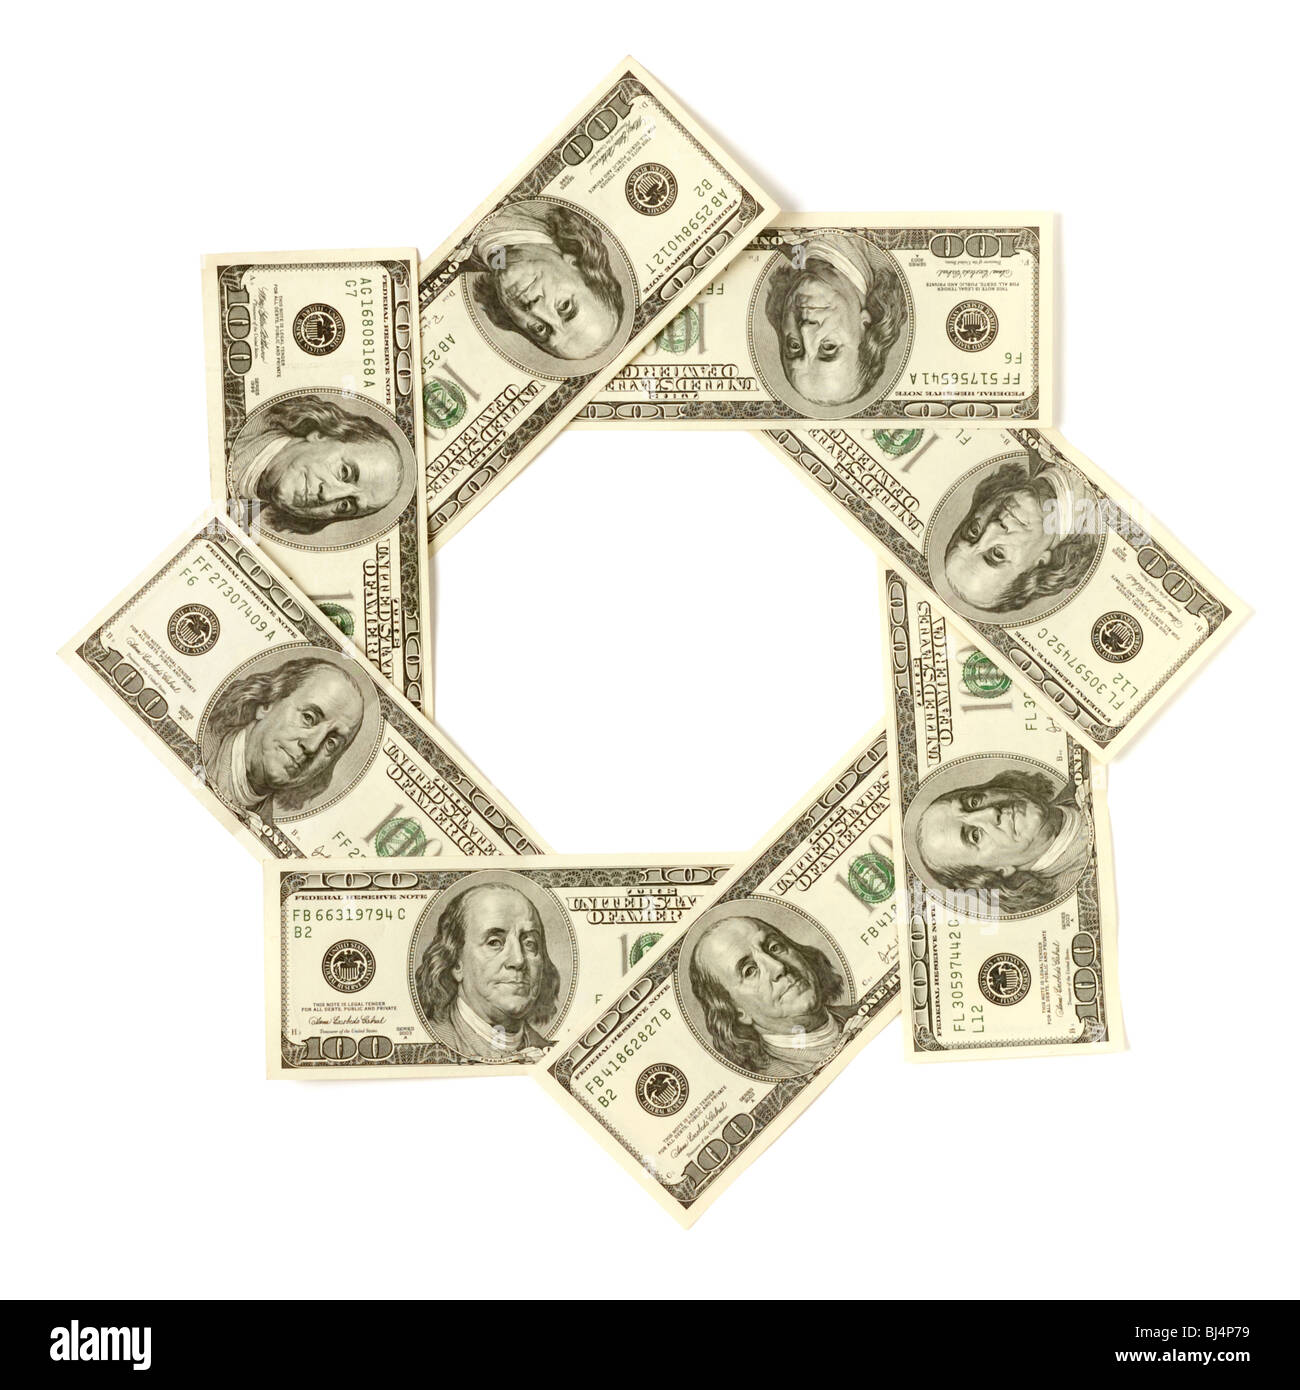 Artistic pattern made from dollar bills Snowflake star or aperture Isolated with a clipping path on white background Stock Photo